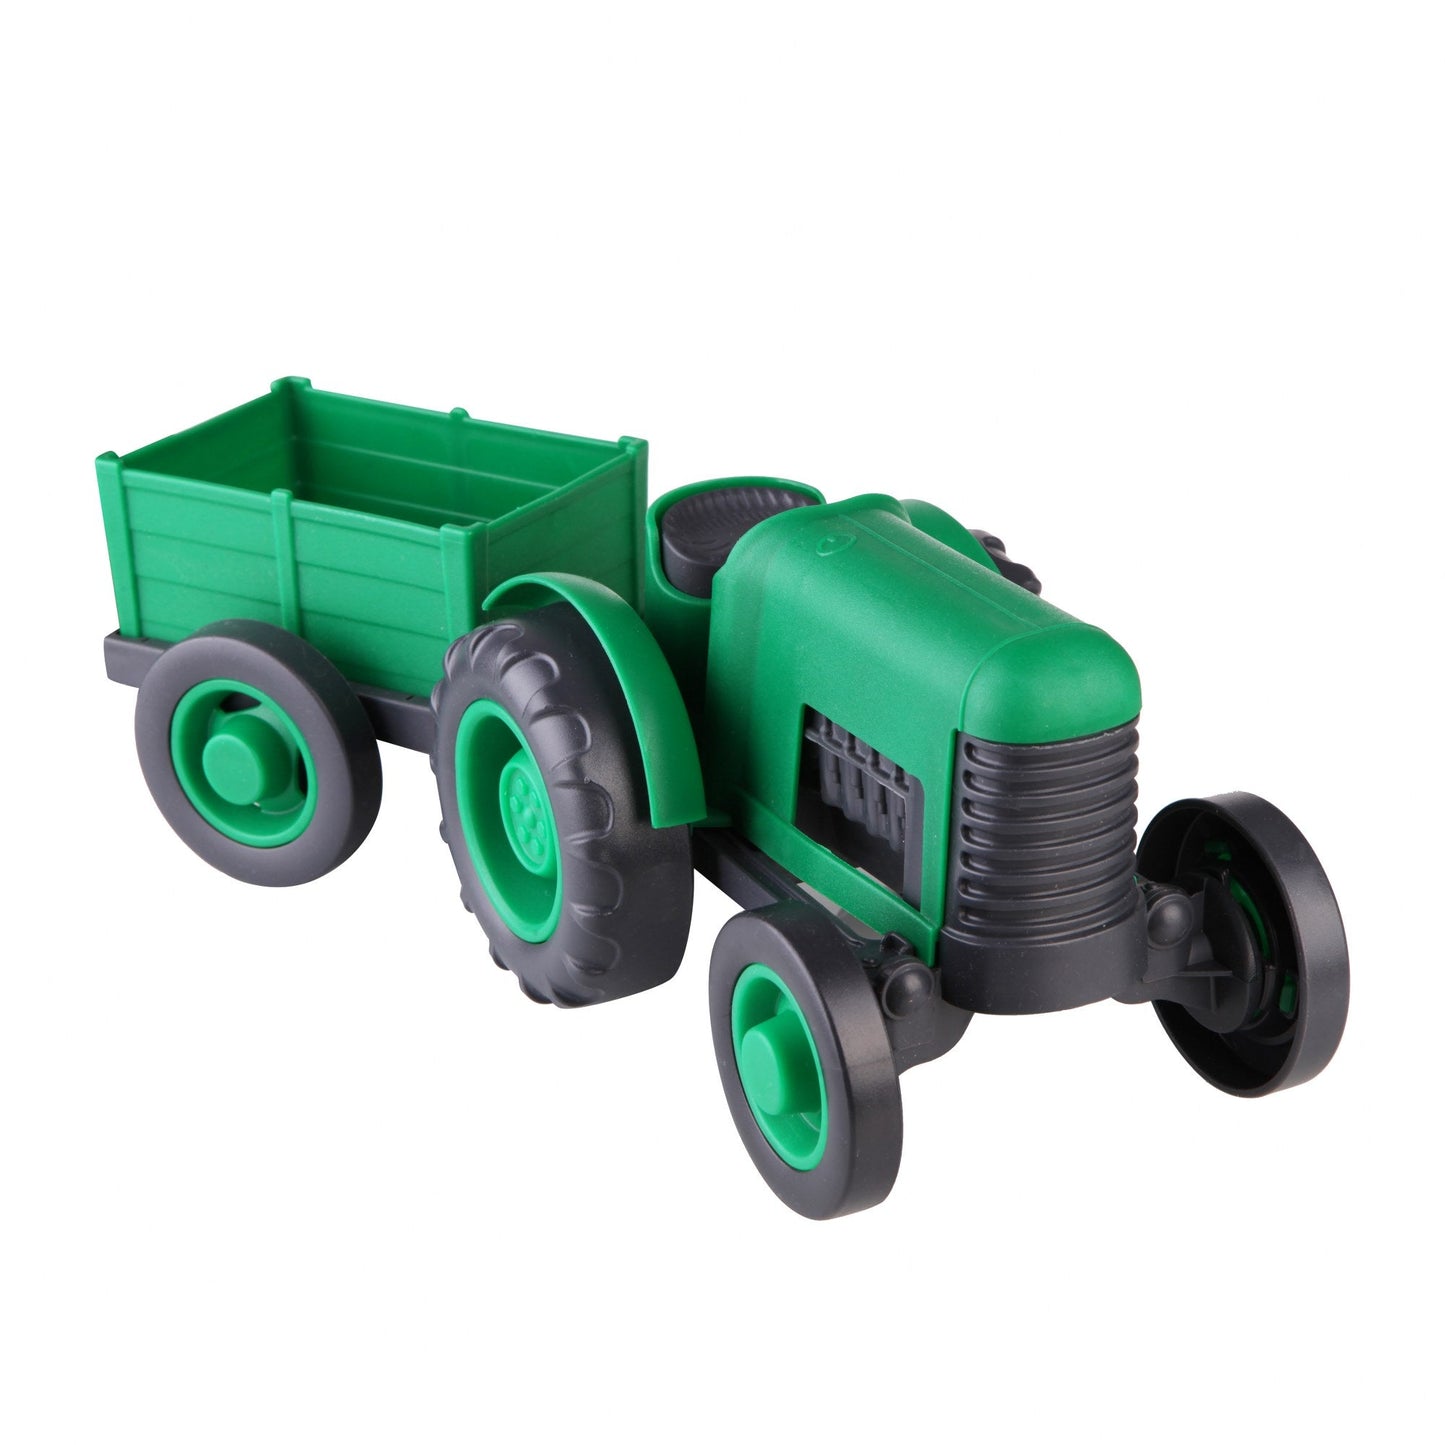 Let's Be Child - Green Tractor with Wagon